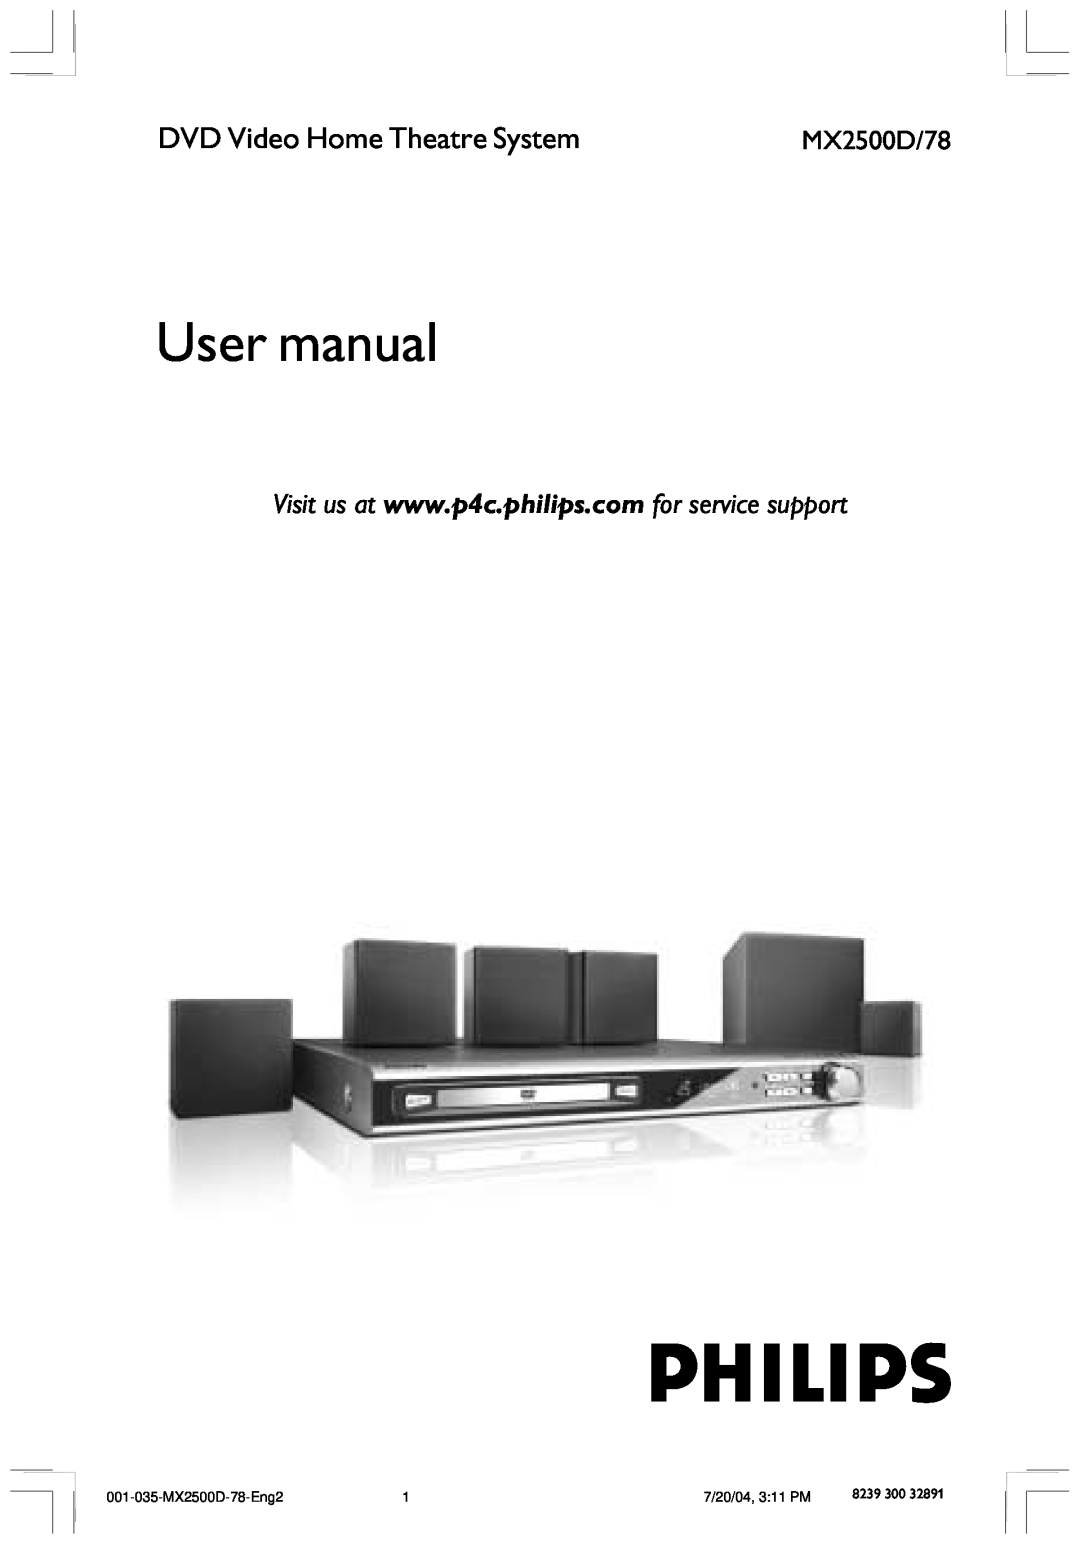 Philips user manual DVD Video Home Theatre System, MX2500D/78, 001-035-MX2500D-78-Eng2, 7/20/04, 3 11 PM 